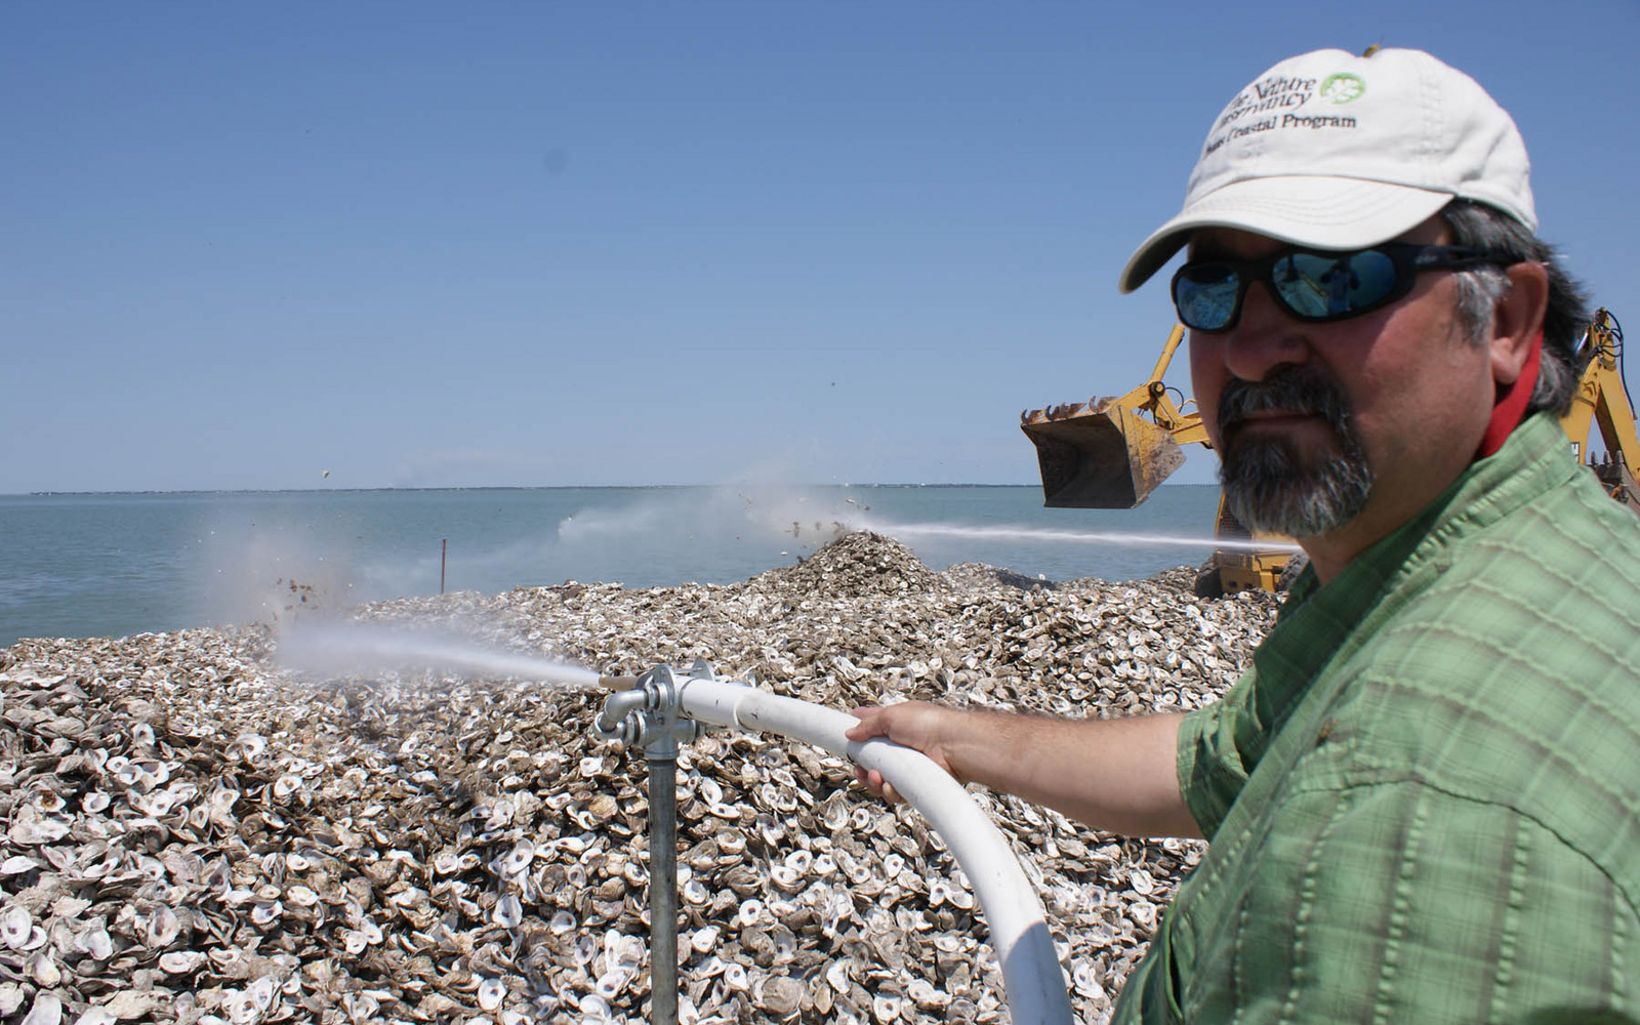 Oyster restoration TNC upper Gulf Coast program manager Mark Dumesnil blows oyster shells into Copano Bay with a fire hose to restore oyster reefs for oysters and fish.  © Mark Gagliano